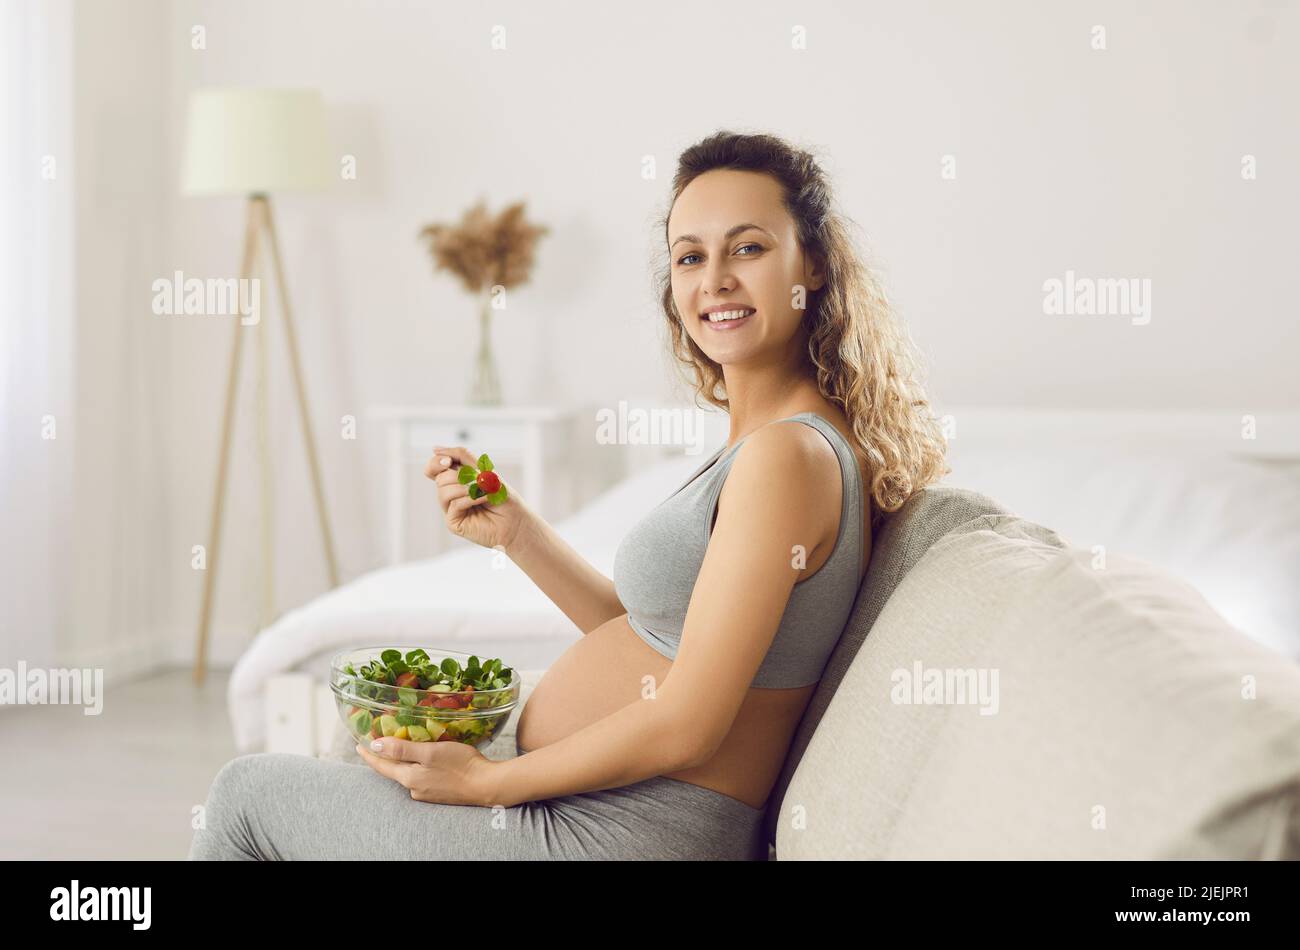 Smiling pregnant woman enjoy tasty vegetable lunch Stock Photo